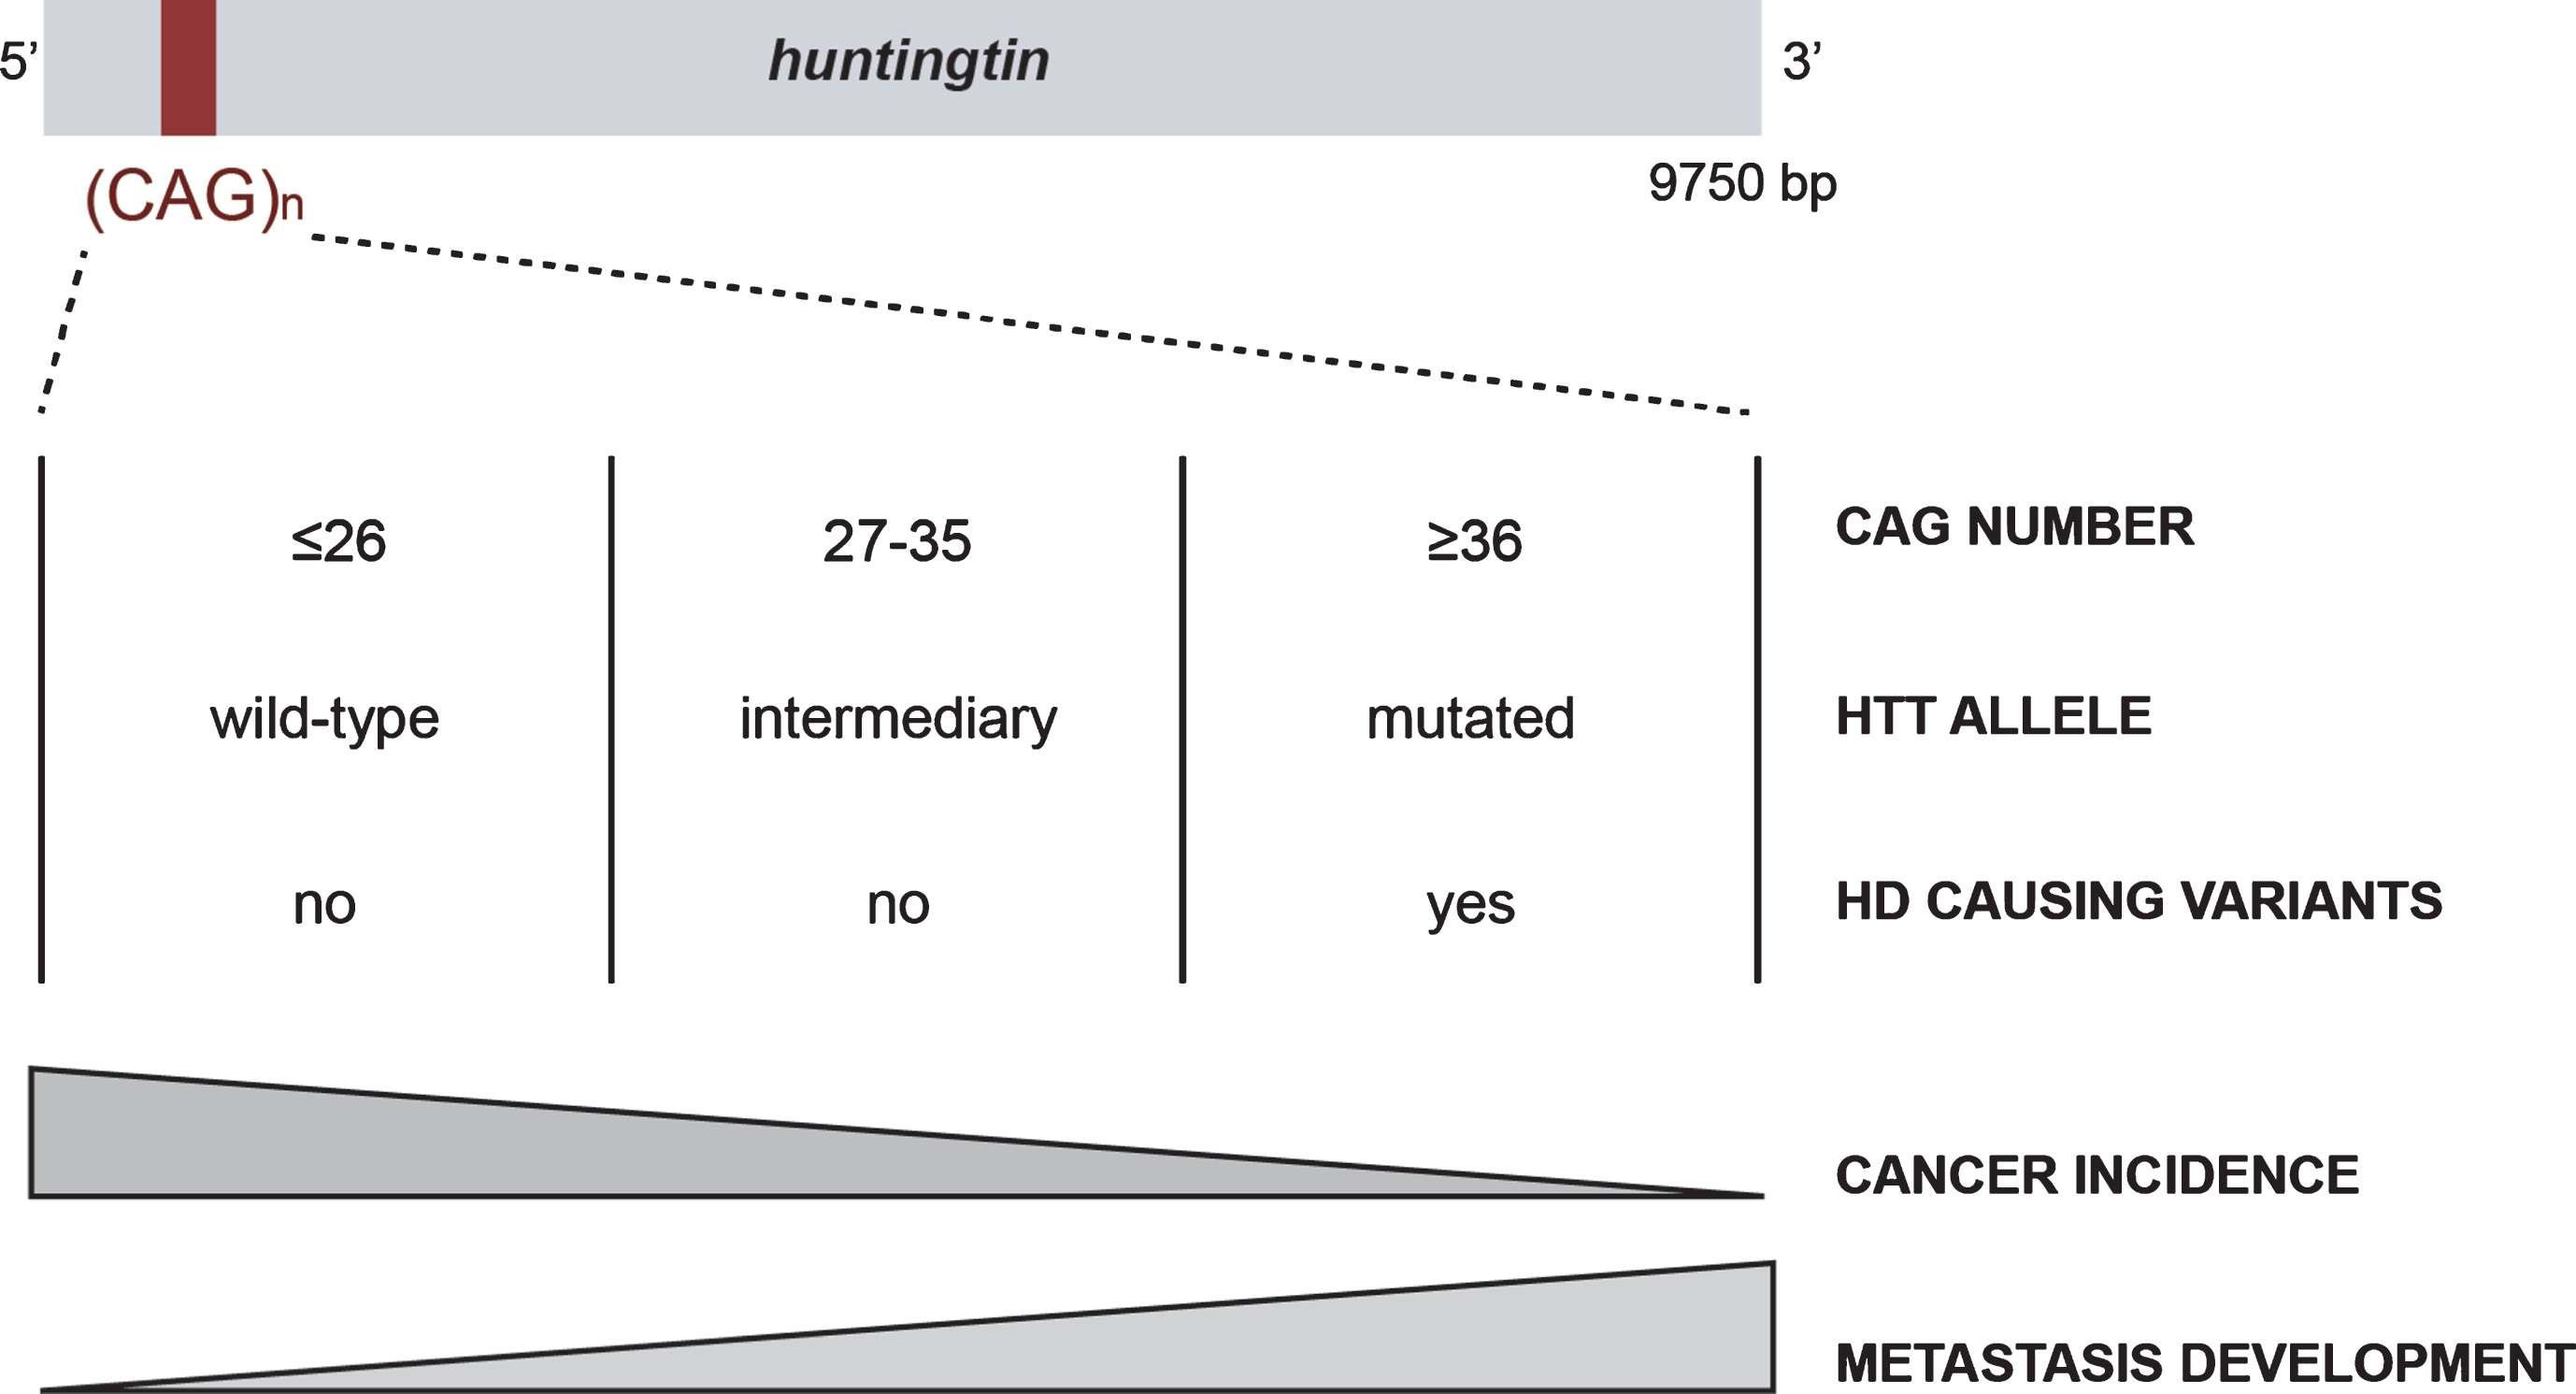 The CAG polymorphism in HTT is associated with Huntington disease and cancer risk and evolution.